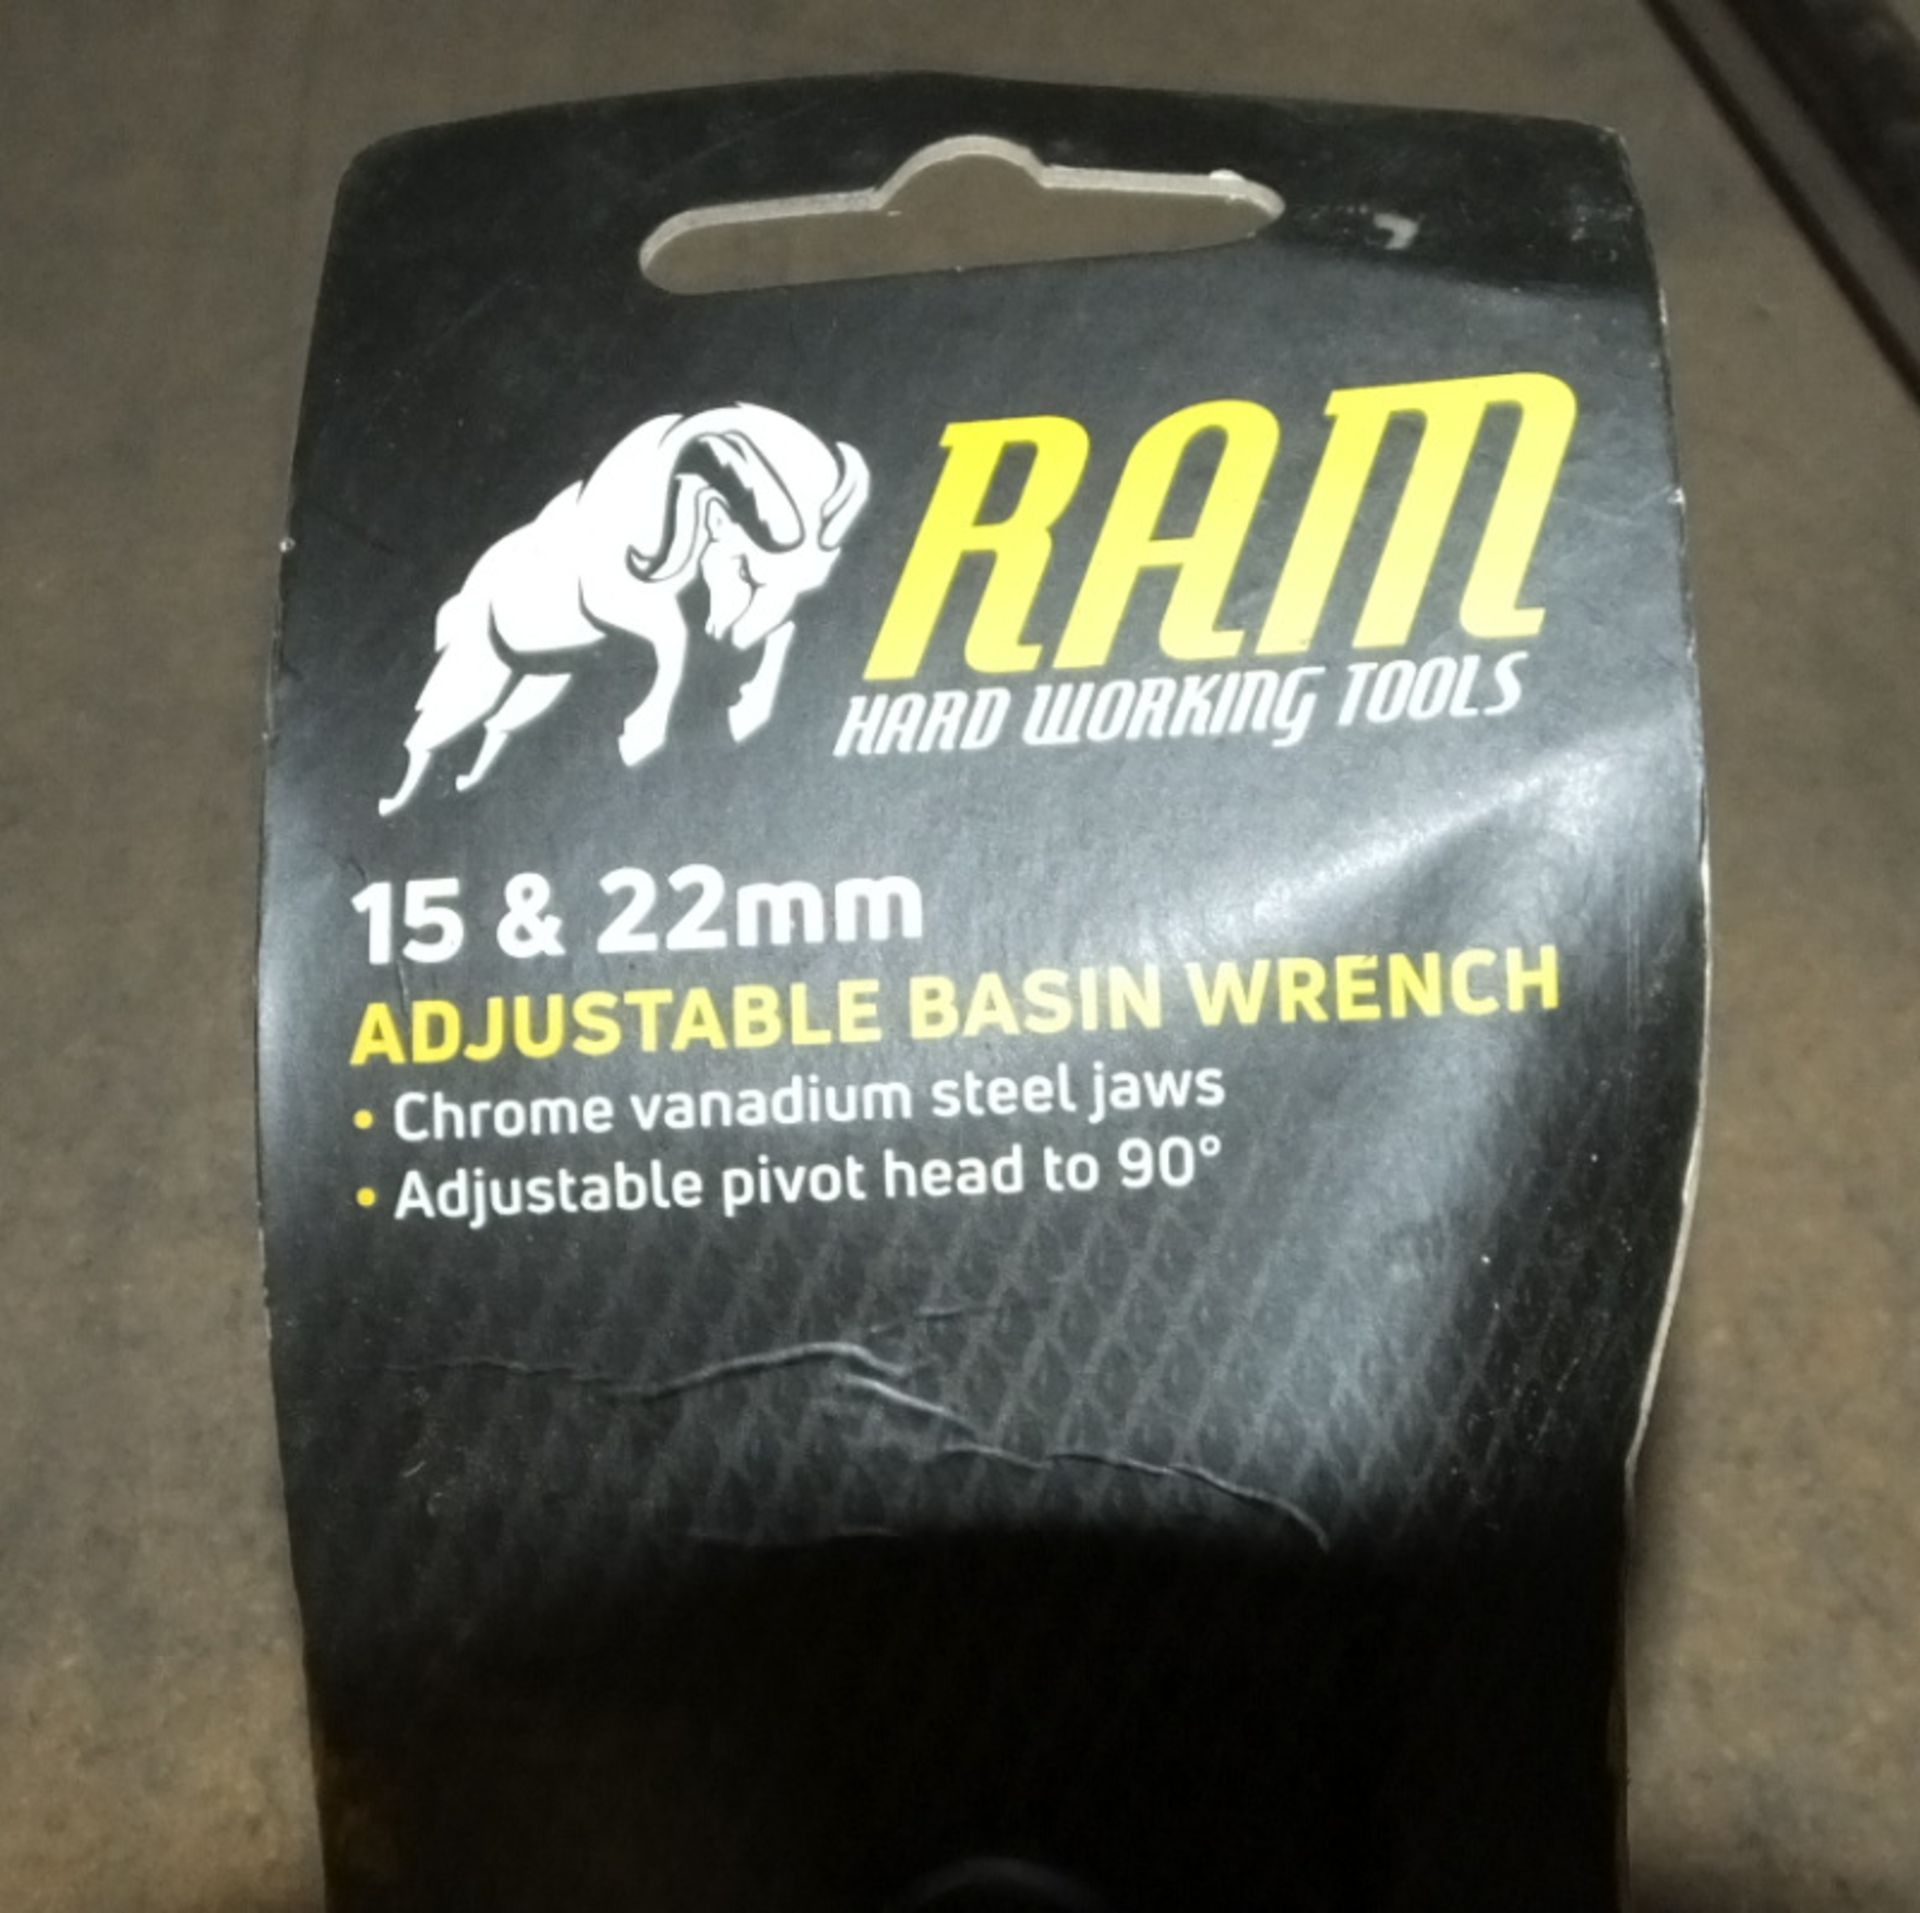 4x RAM 15 & 22m adjustable basin wrenches - Image 2 of 2